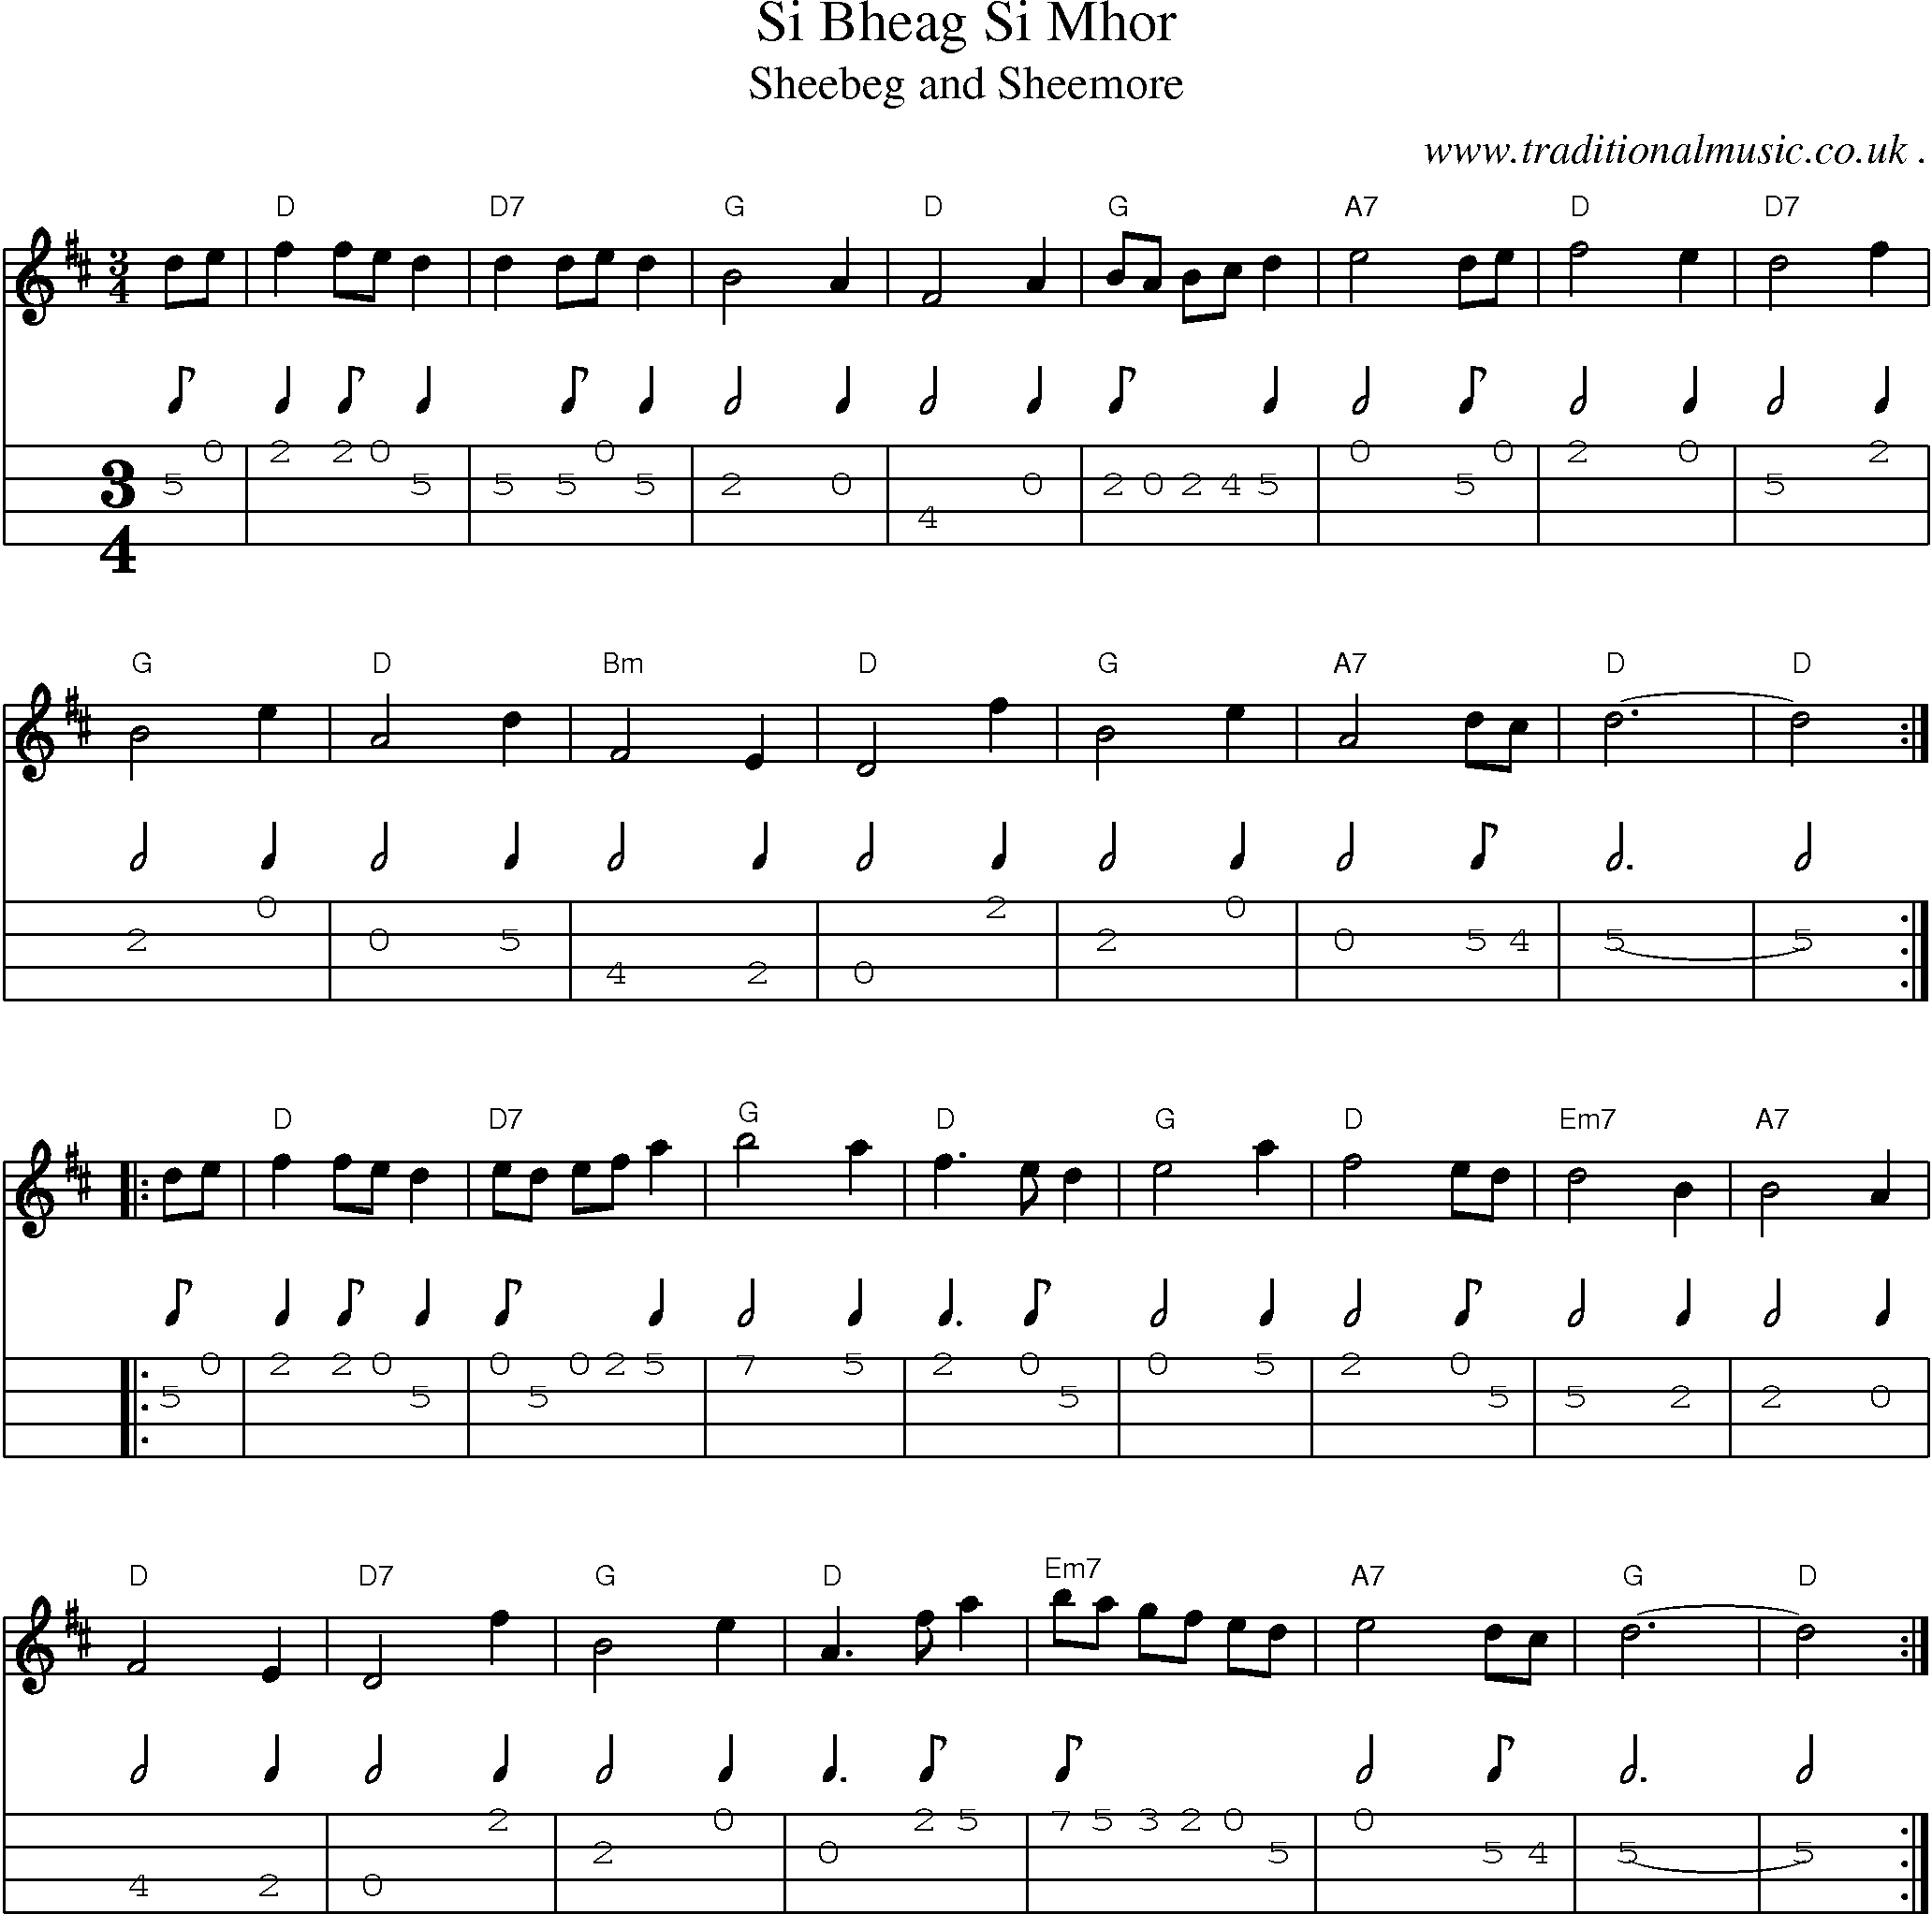 Music Score and Guitar Tabs for Si Bheag Si Mhor